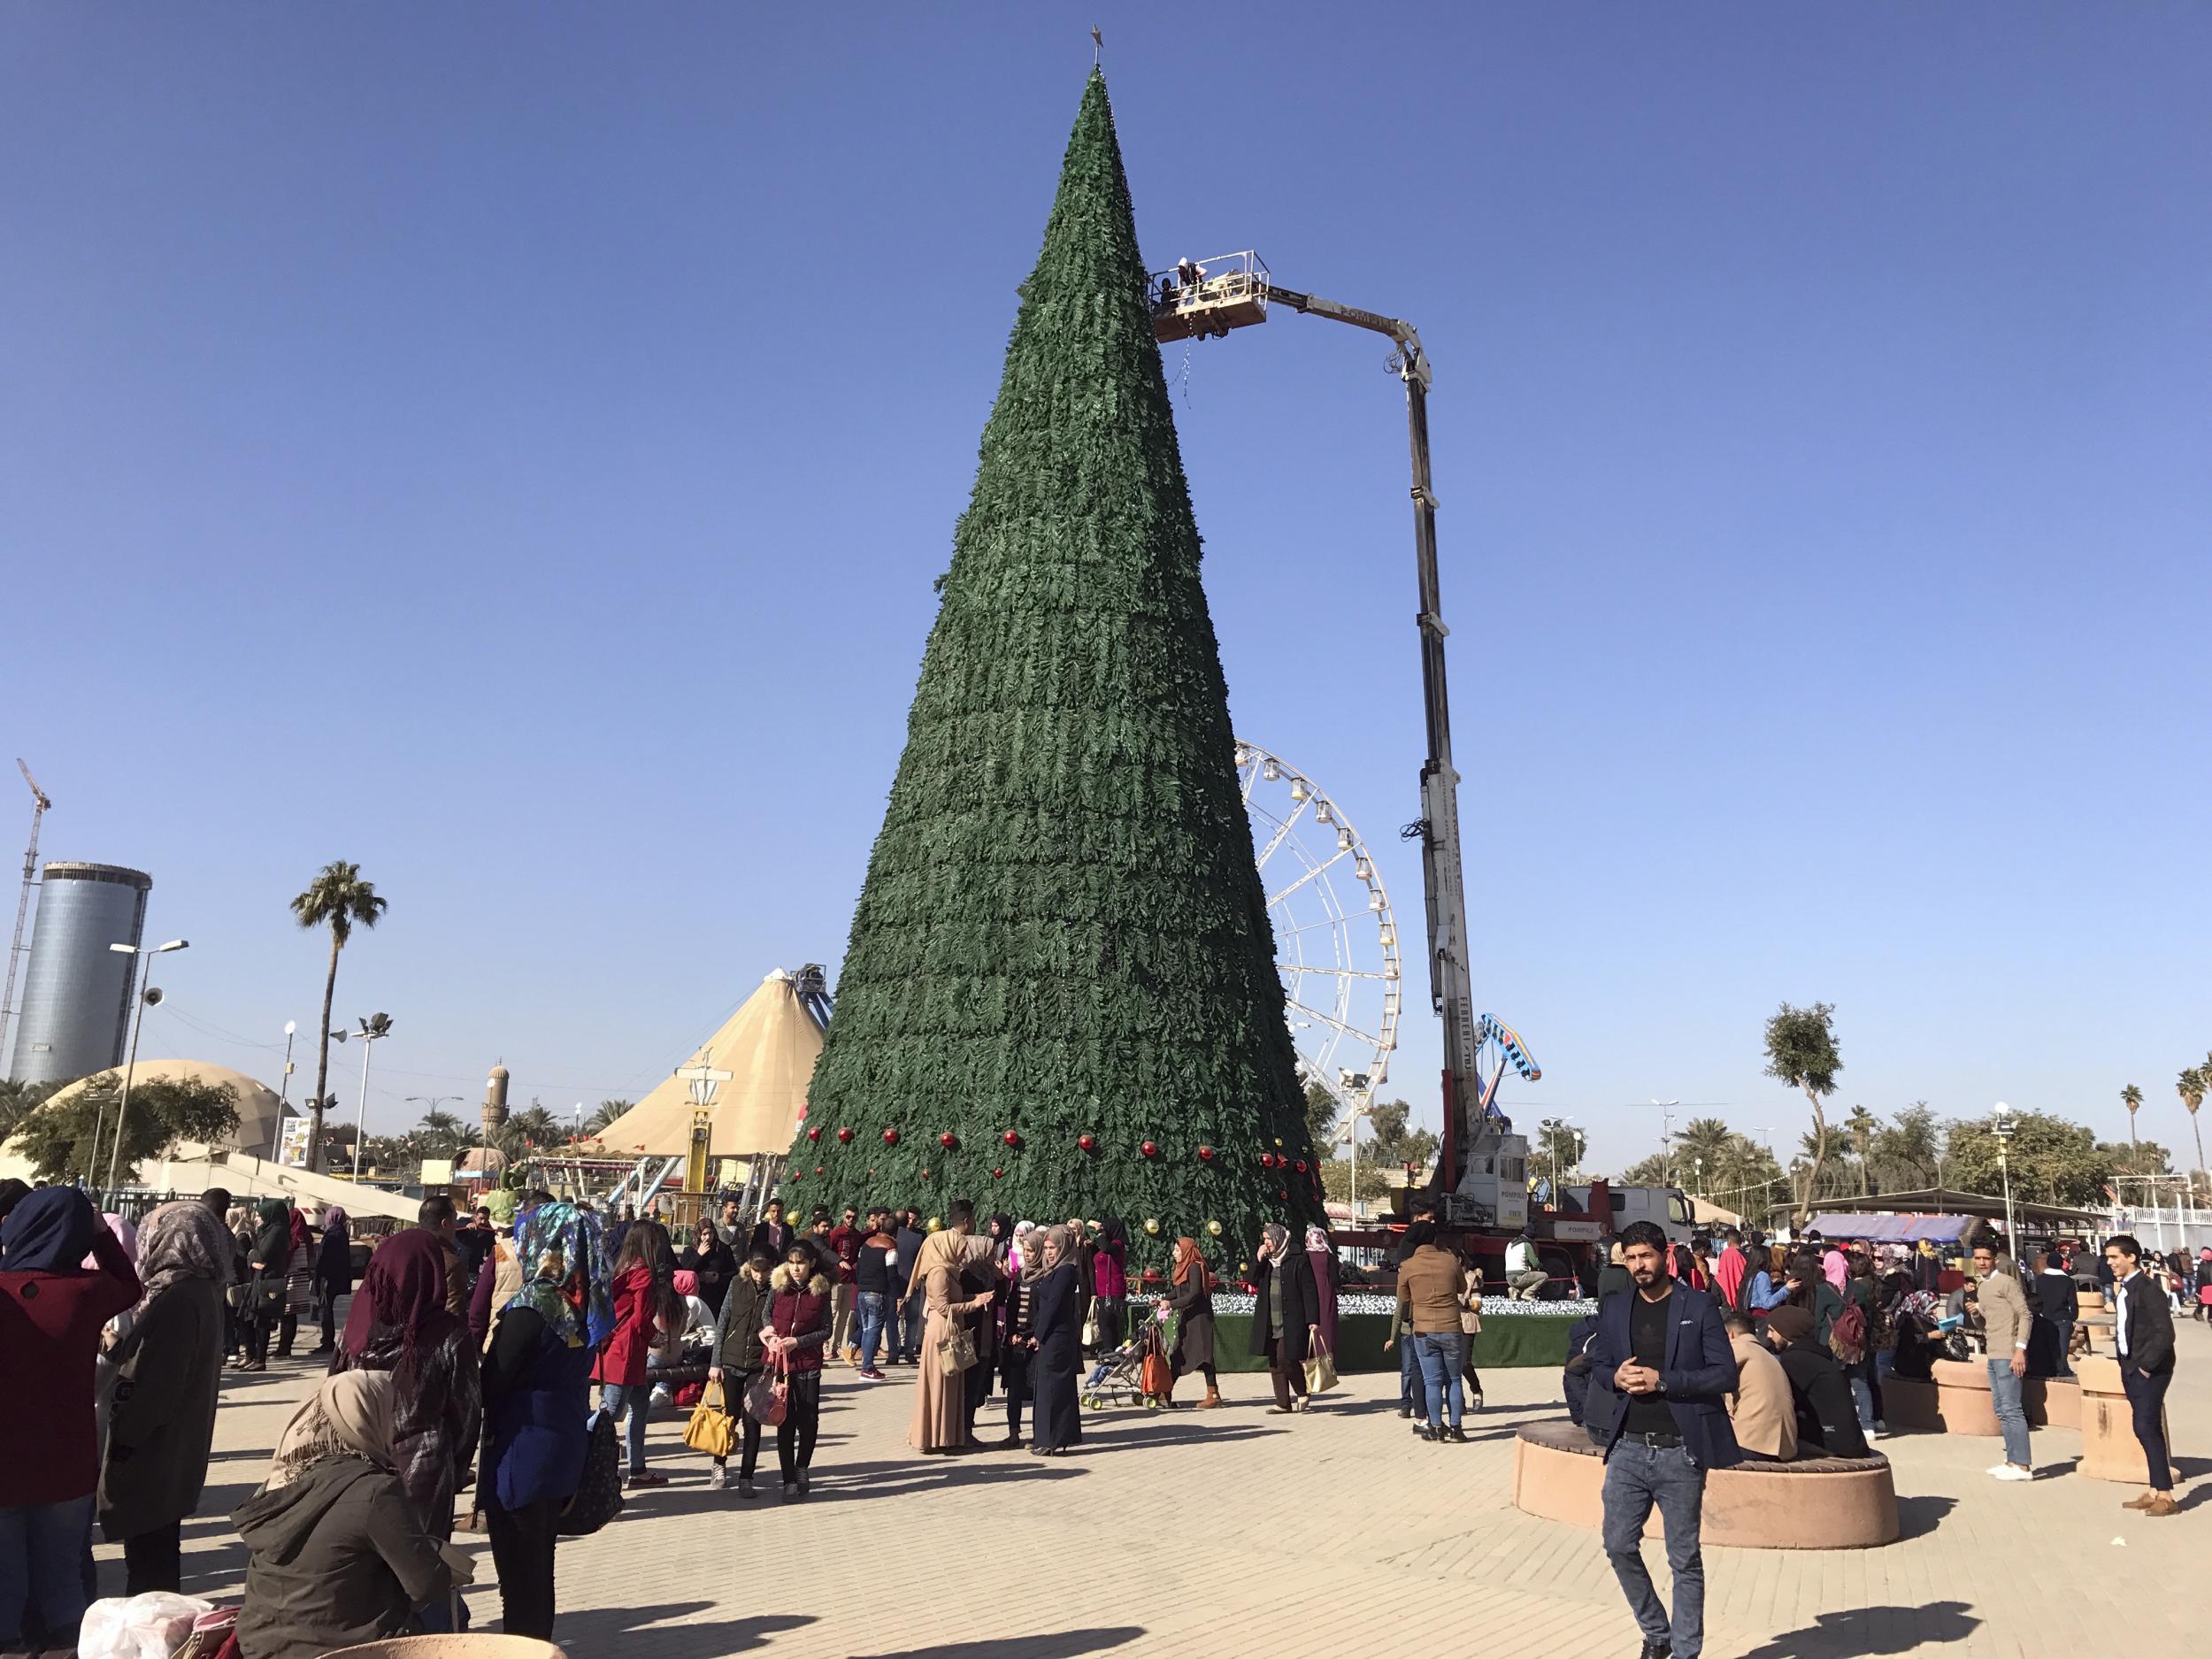 Workers use a crane to mount a large Christmas tree in al-Zawra Park in Baghdad